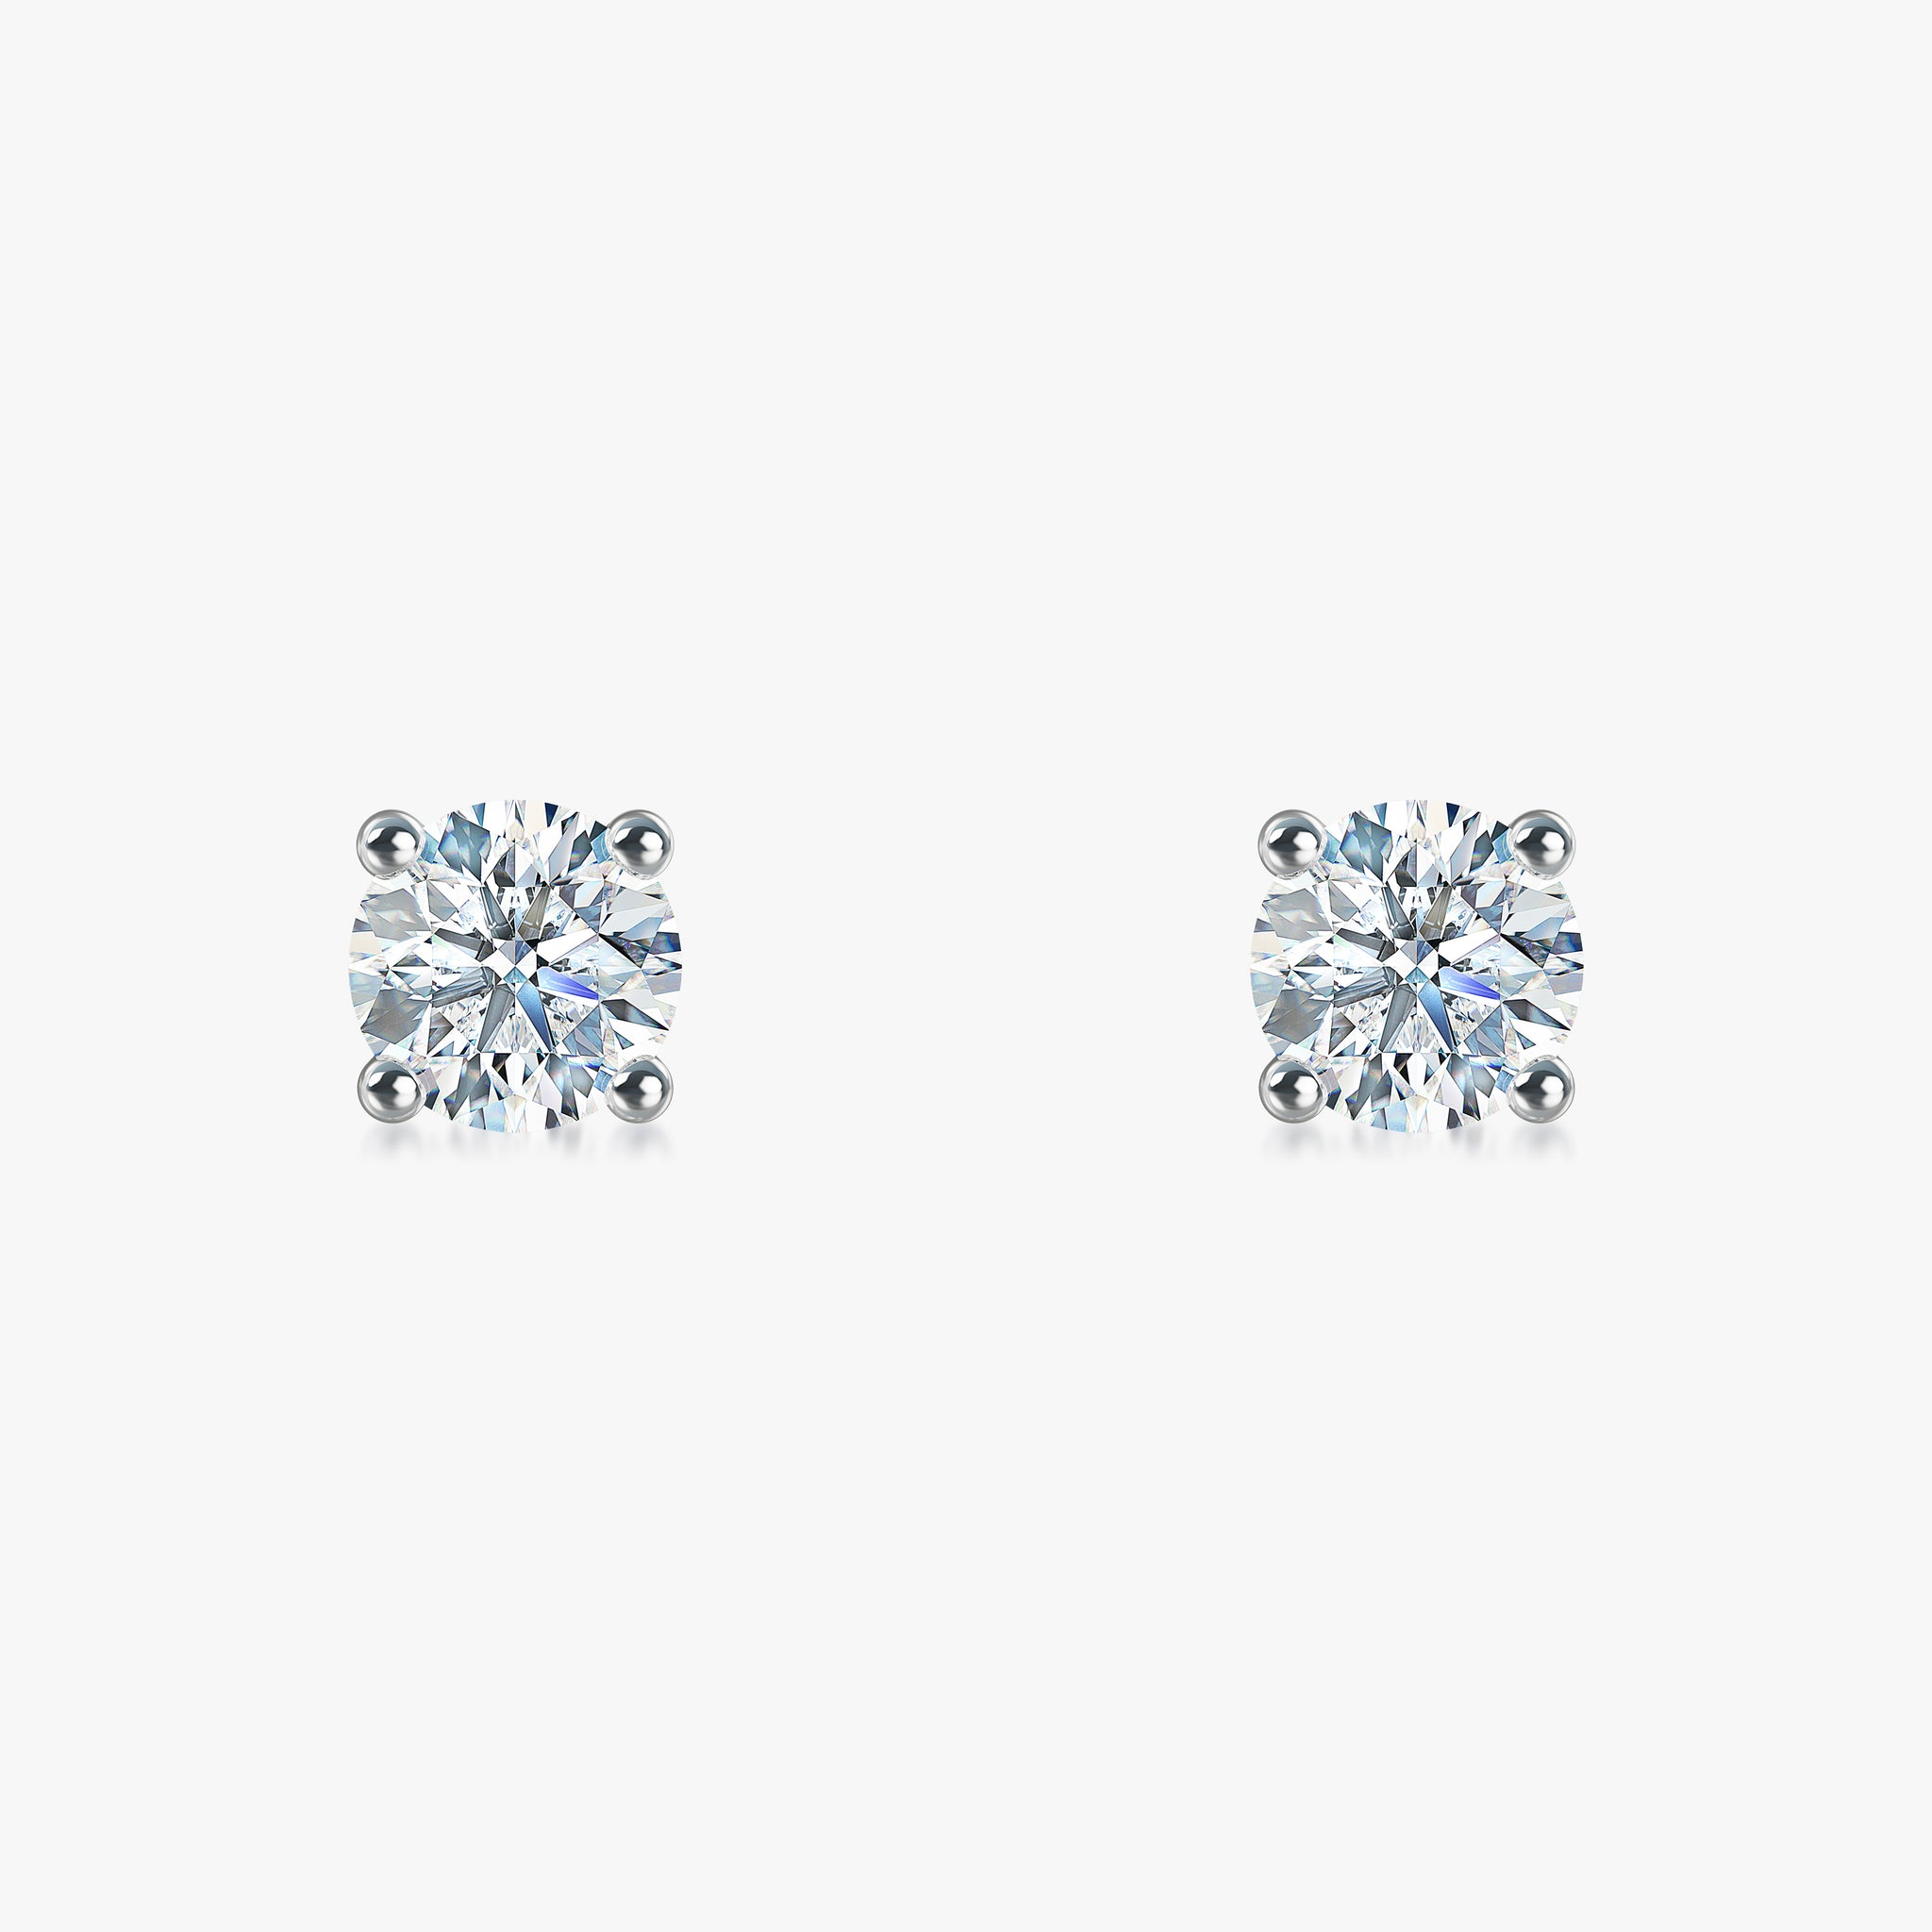 J'EVAR 18KT White Gold ALTR Lab Grown Diamond Stud Earrings with Guardian Backs Front View | Pair / 2.00 CT